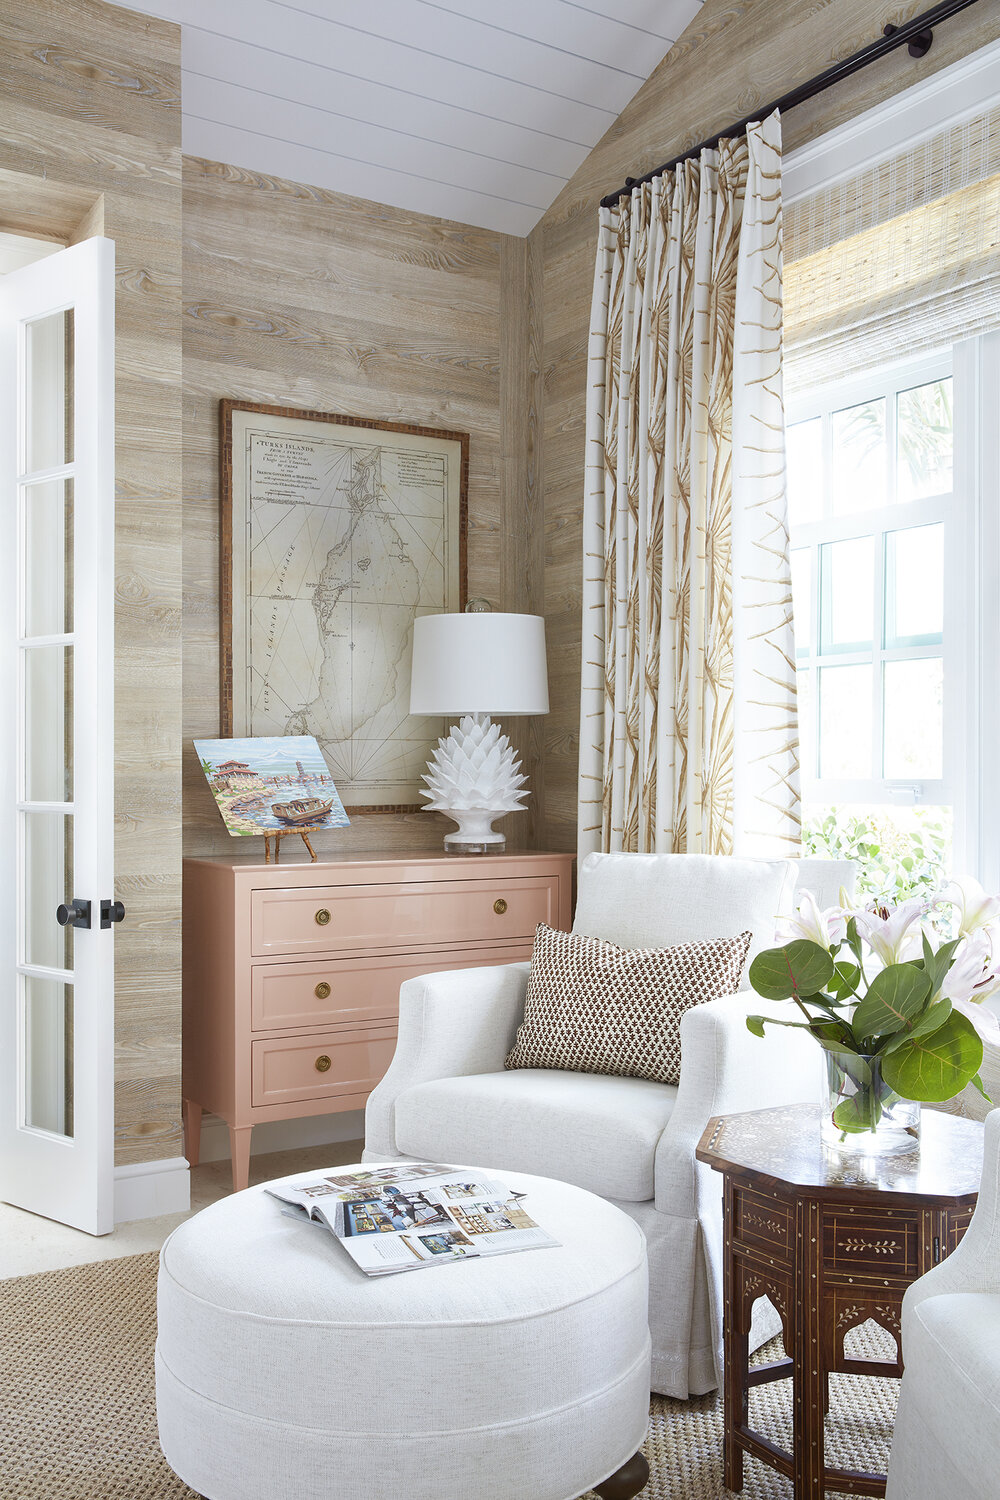 Kara Miller Interiors | Brantley Photography family room with blonde wood | living room | paneling | shiplap | interiors | blog post